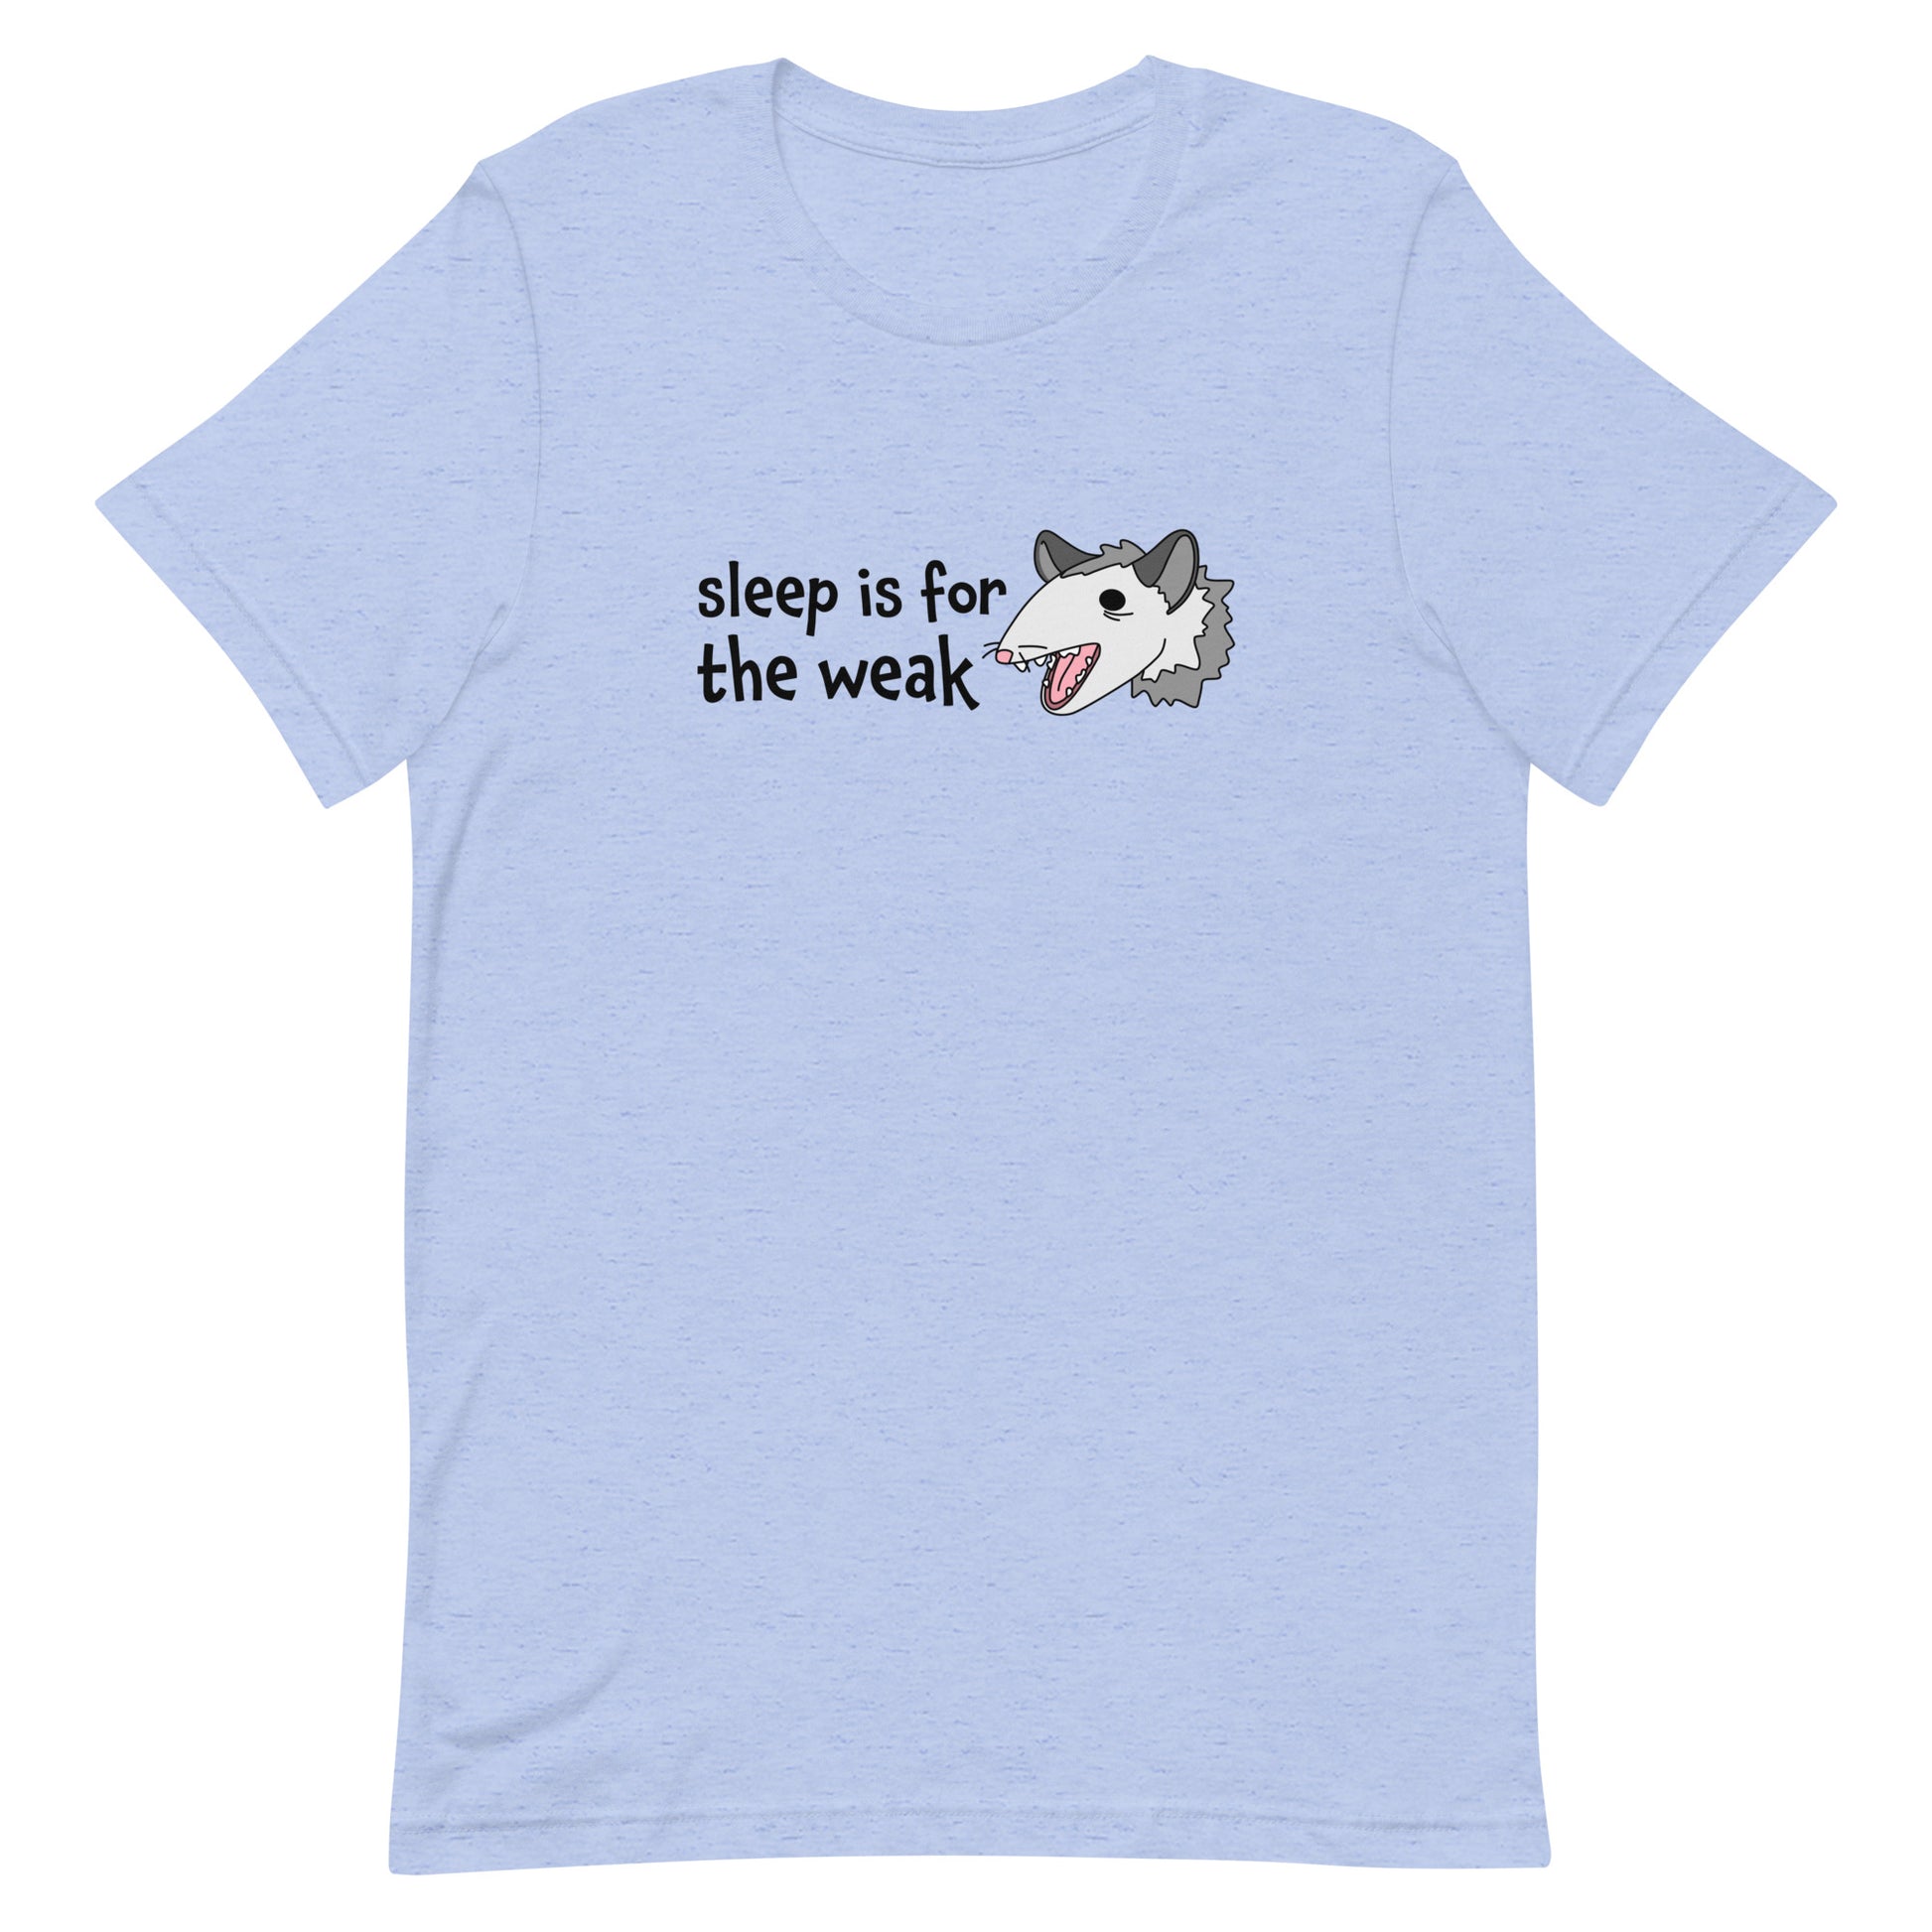 A light blue crewneck t-shirt featuring an illustration of an opossum with its mouth open, as if it was yelling. Text alongside the opossum reads "sleep is for the weak"